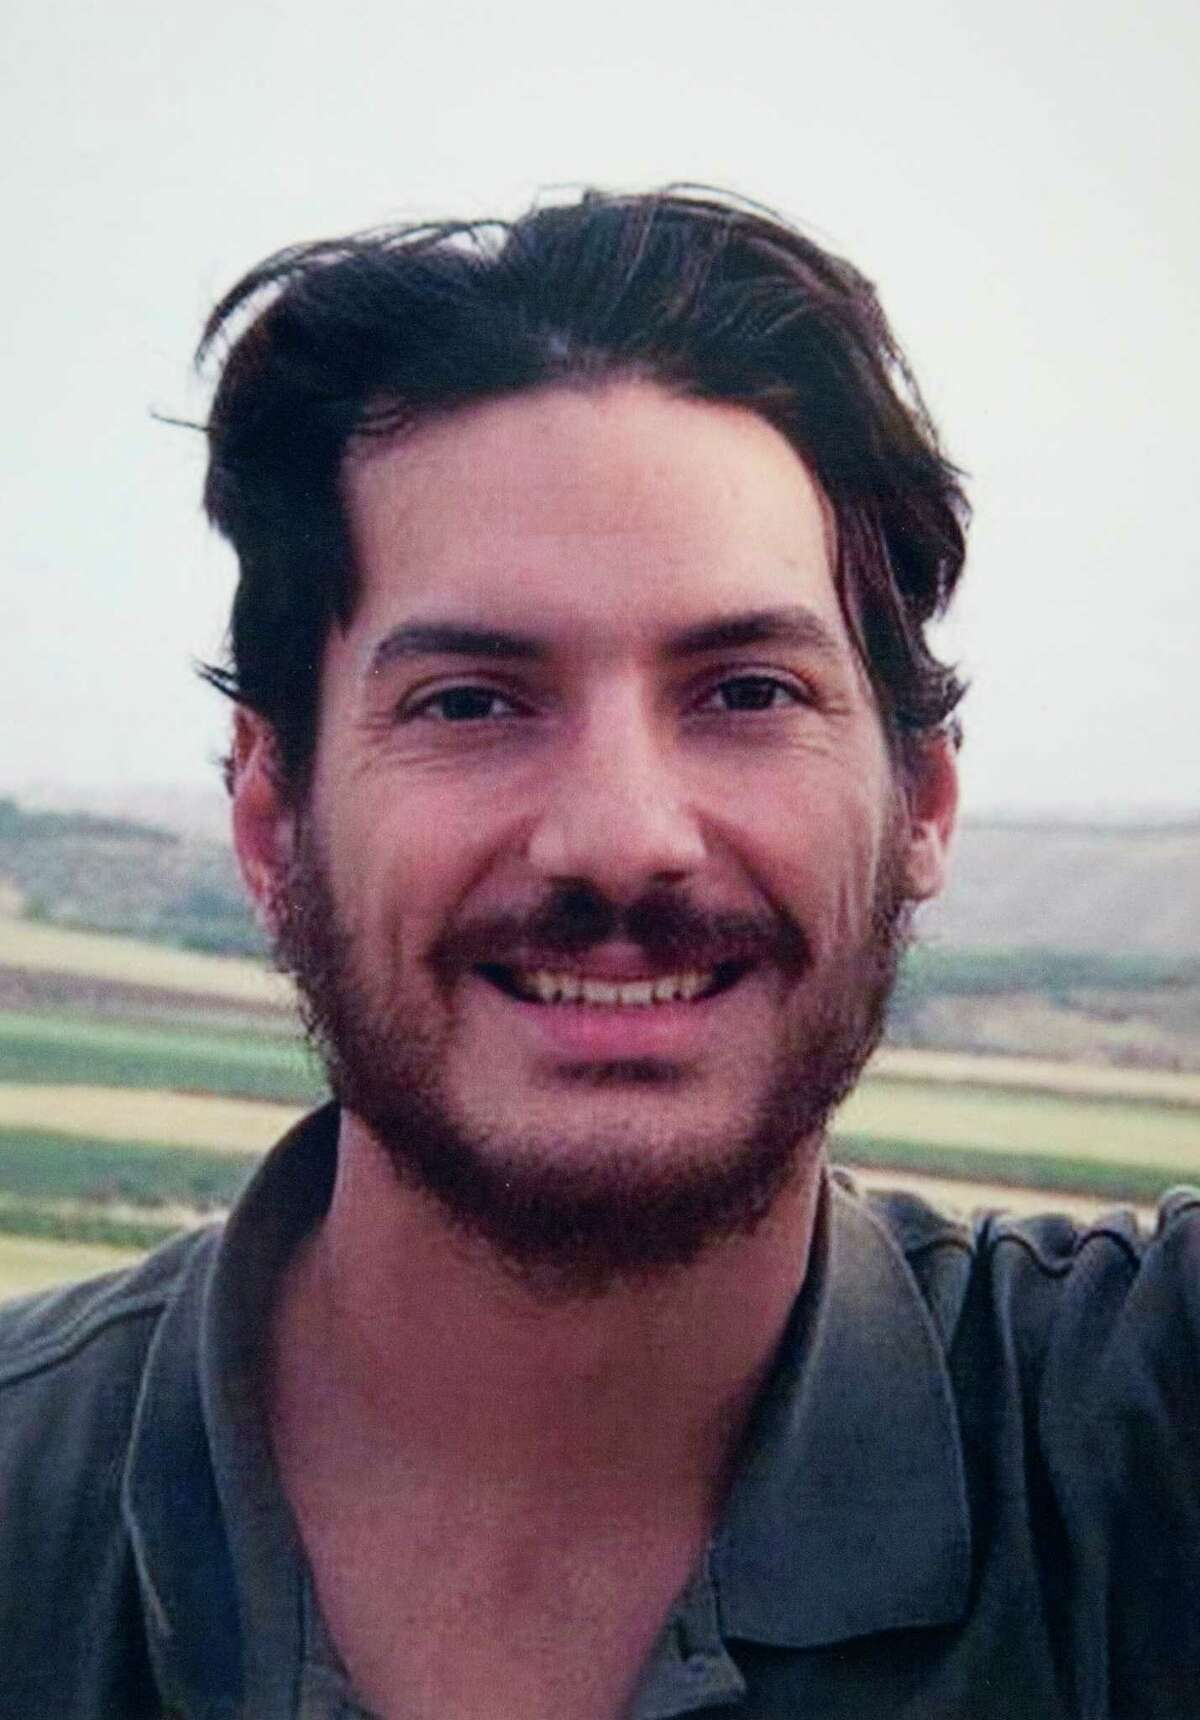 Photograph of Austin Bennett Tice provided by his family. Tice went missing in Syria while working as a freelance journalist. Tice disappearance took place in August 13, 2012. Photo Provided